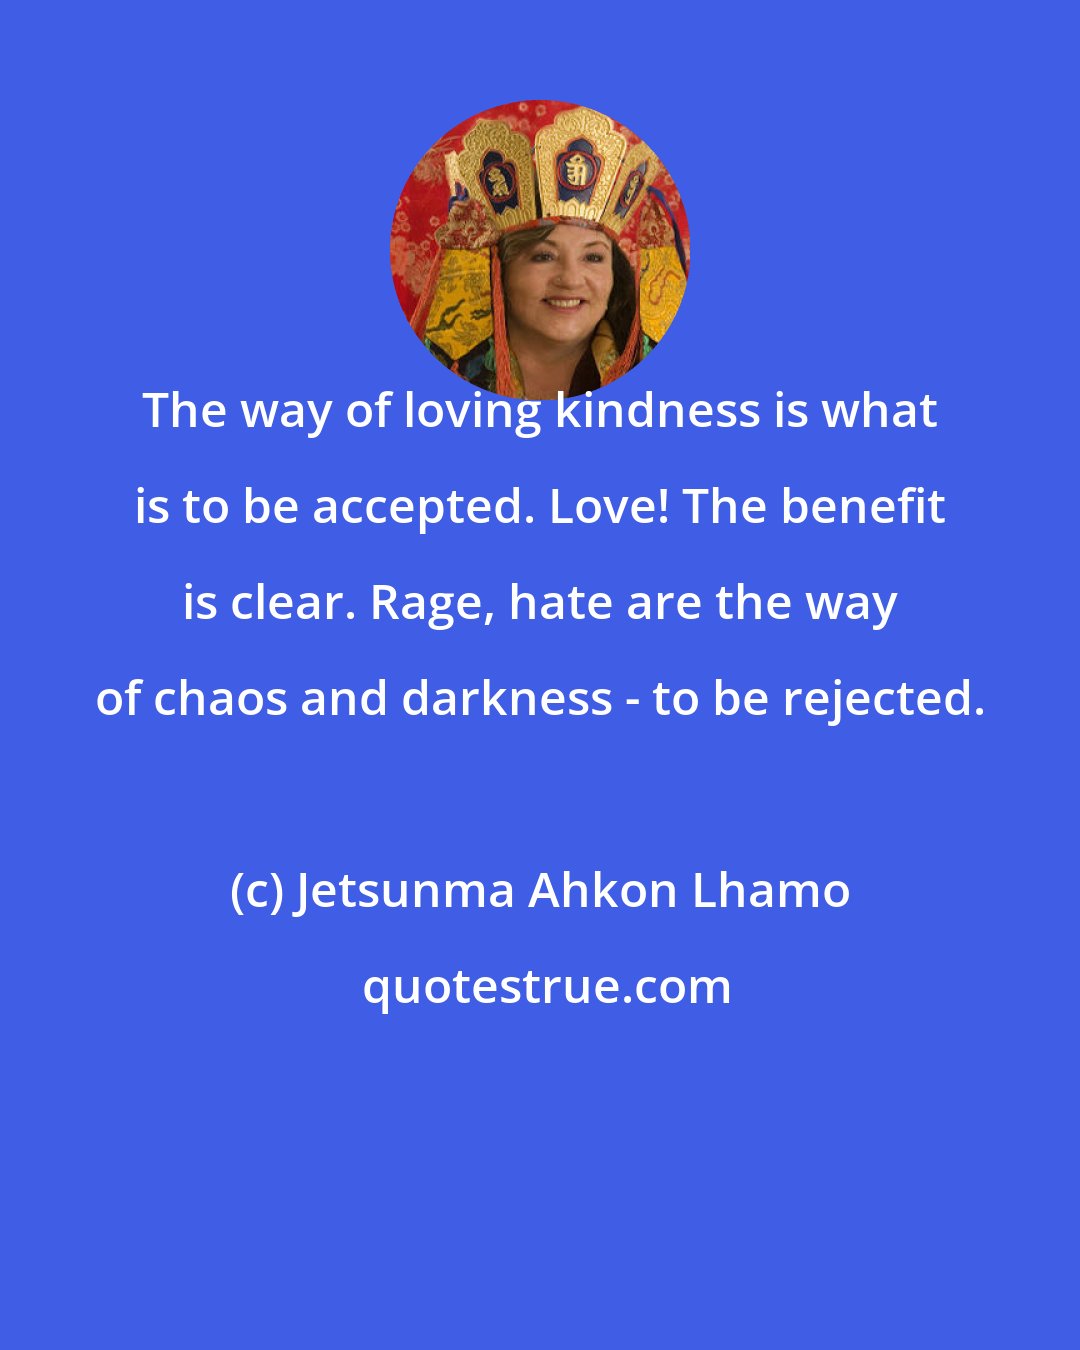 Jetsunma Ahkon Lhamo: The way of loving kindness is what is to be accepted. Love! The benefit is clear. Rage, hate are the way of chaos and darkness - to be rejected.